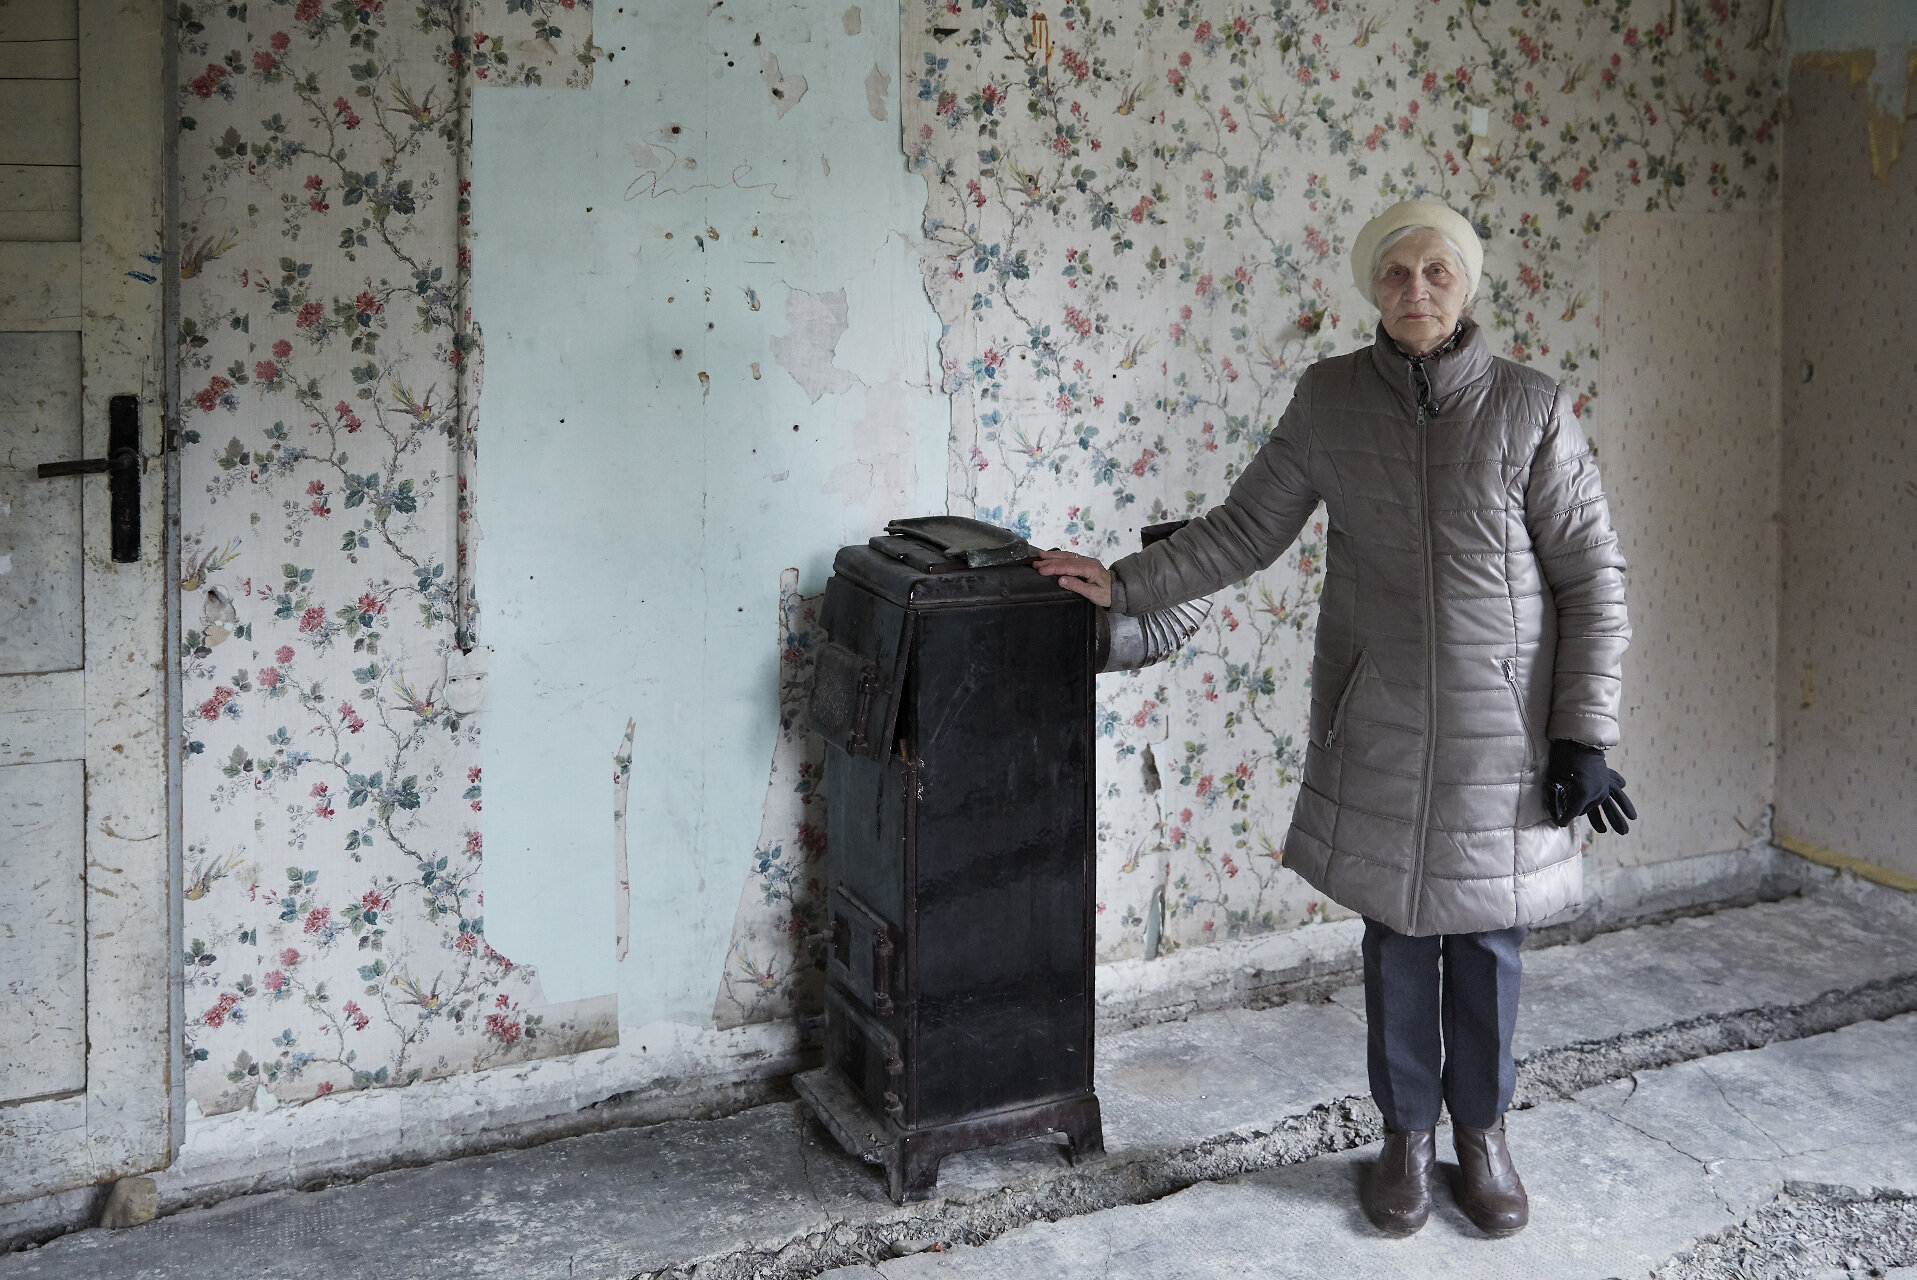 An older woman standing in a room with flowery wallpaper. She has one hand on an old stove.